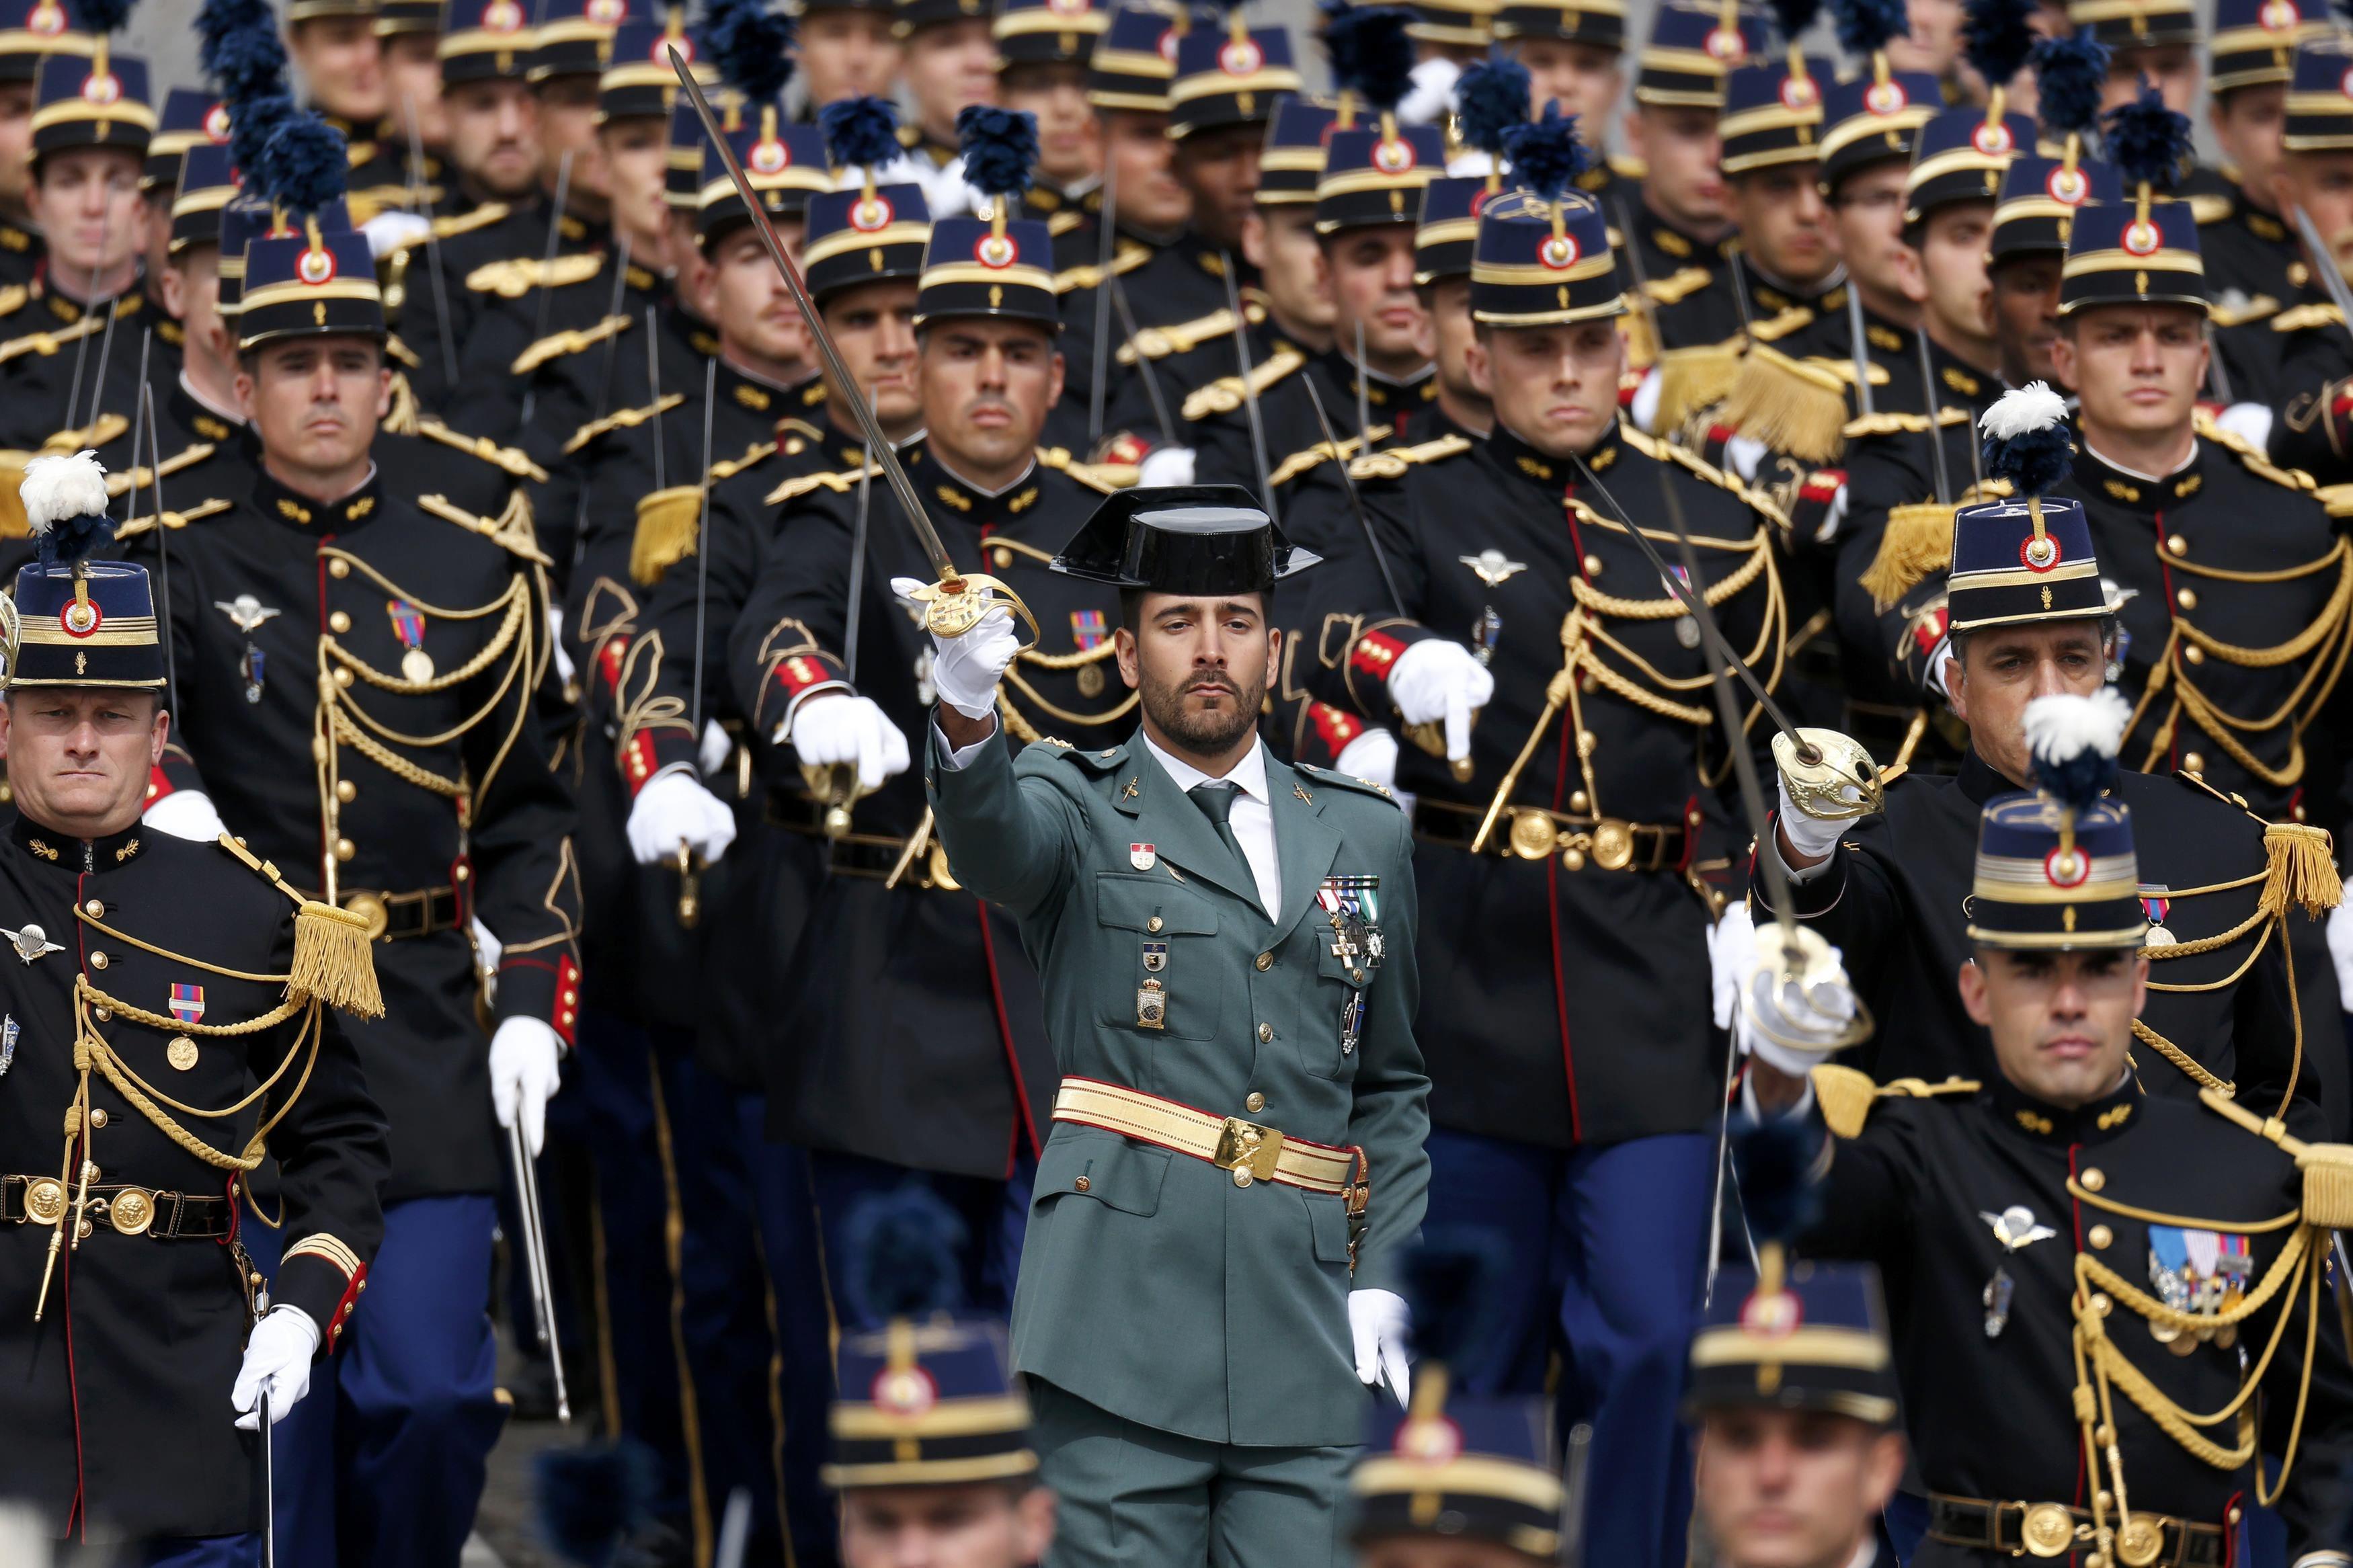 A member of the Spanish Guardia Civil attends the Bastille Day military parade on the Champs-Elysees